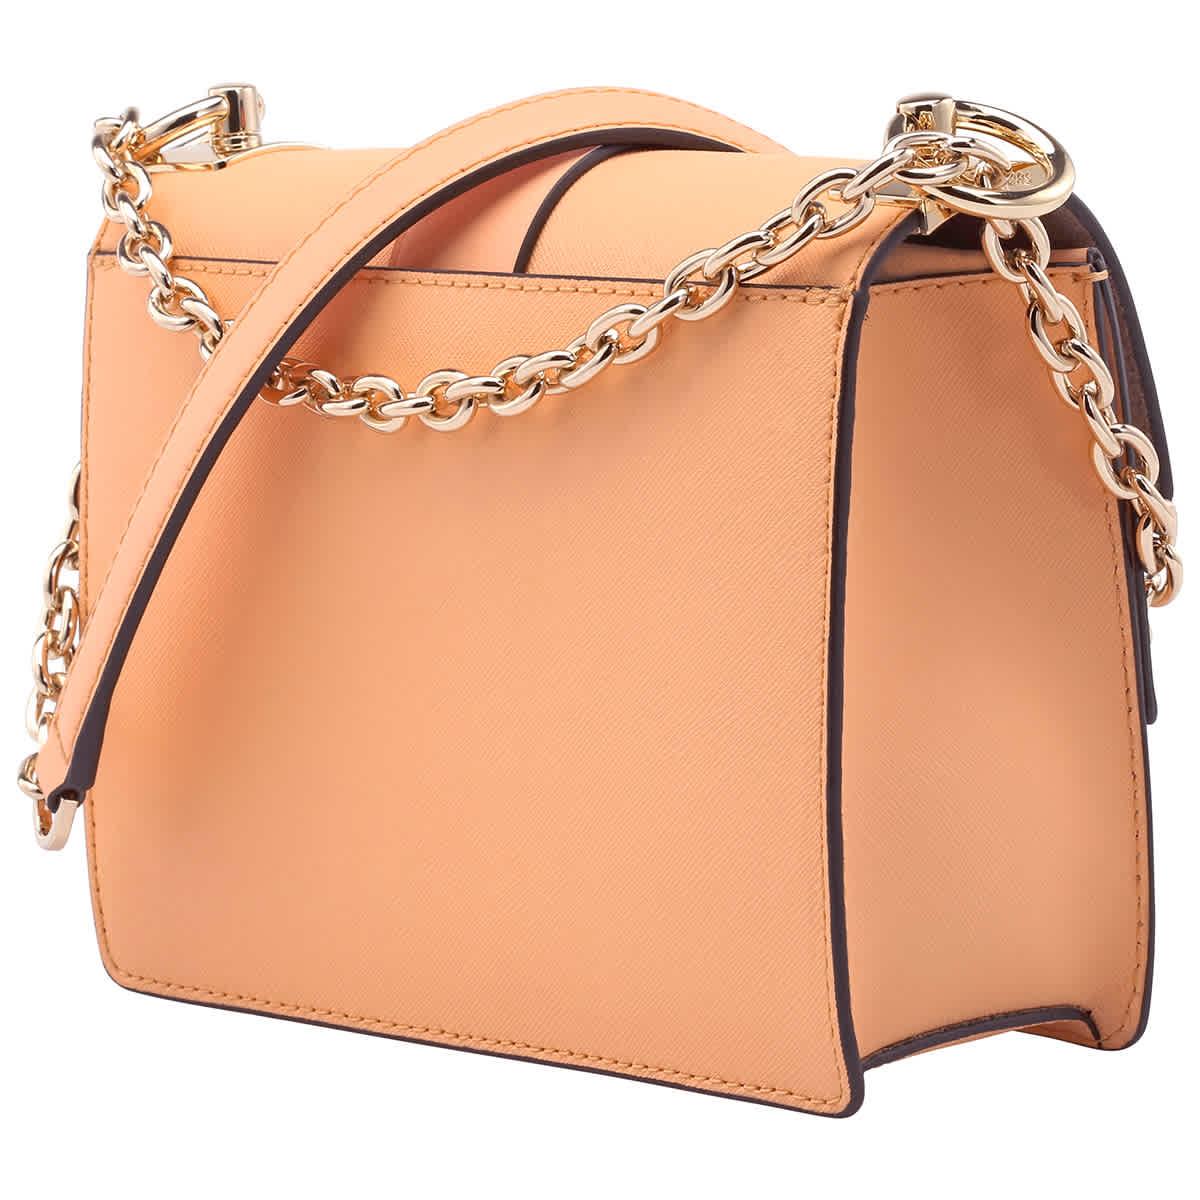 MICHAEL KORS Greenwich Small Two-Tone Logo And Saffiano Leather